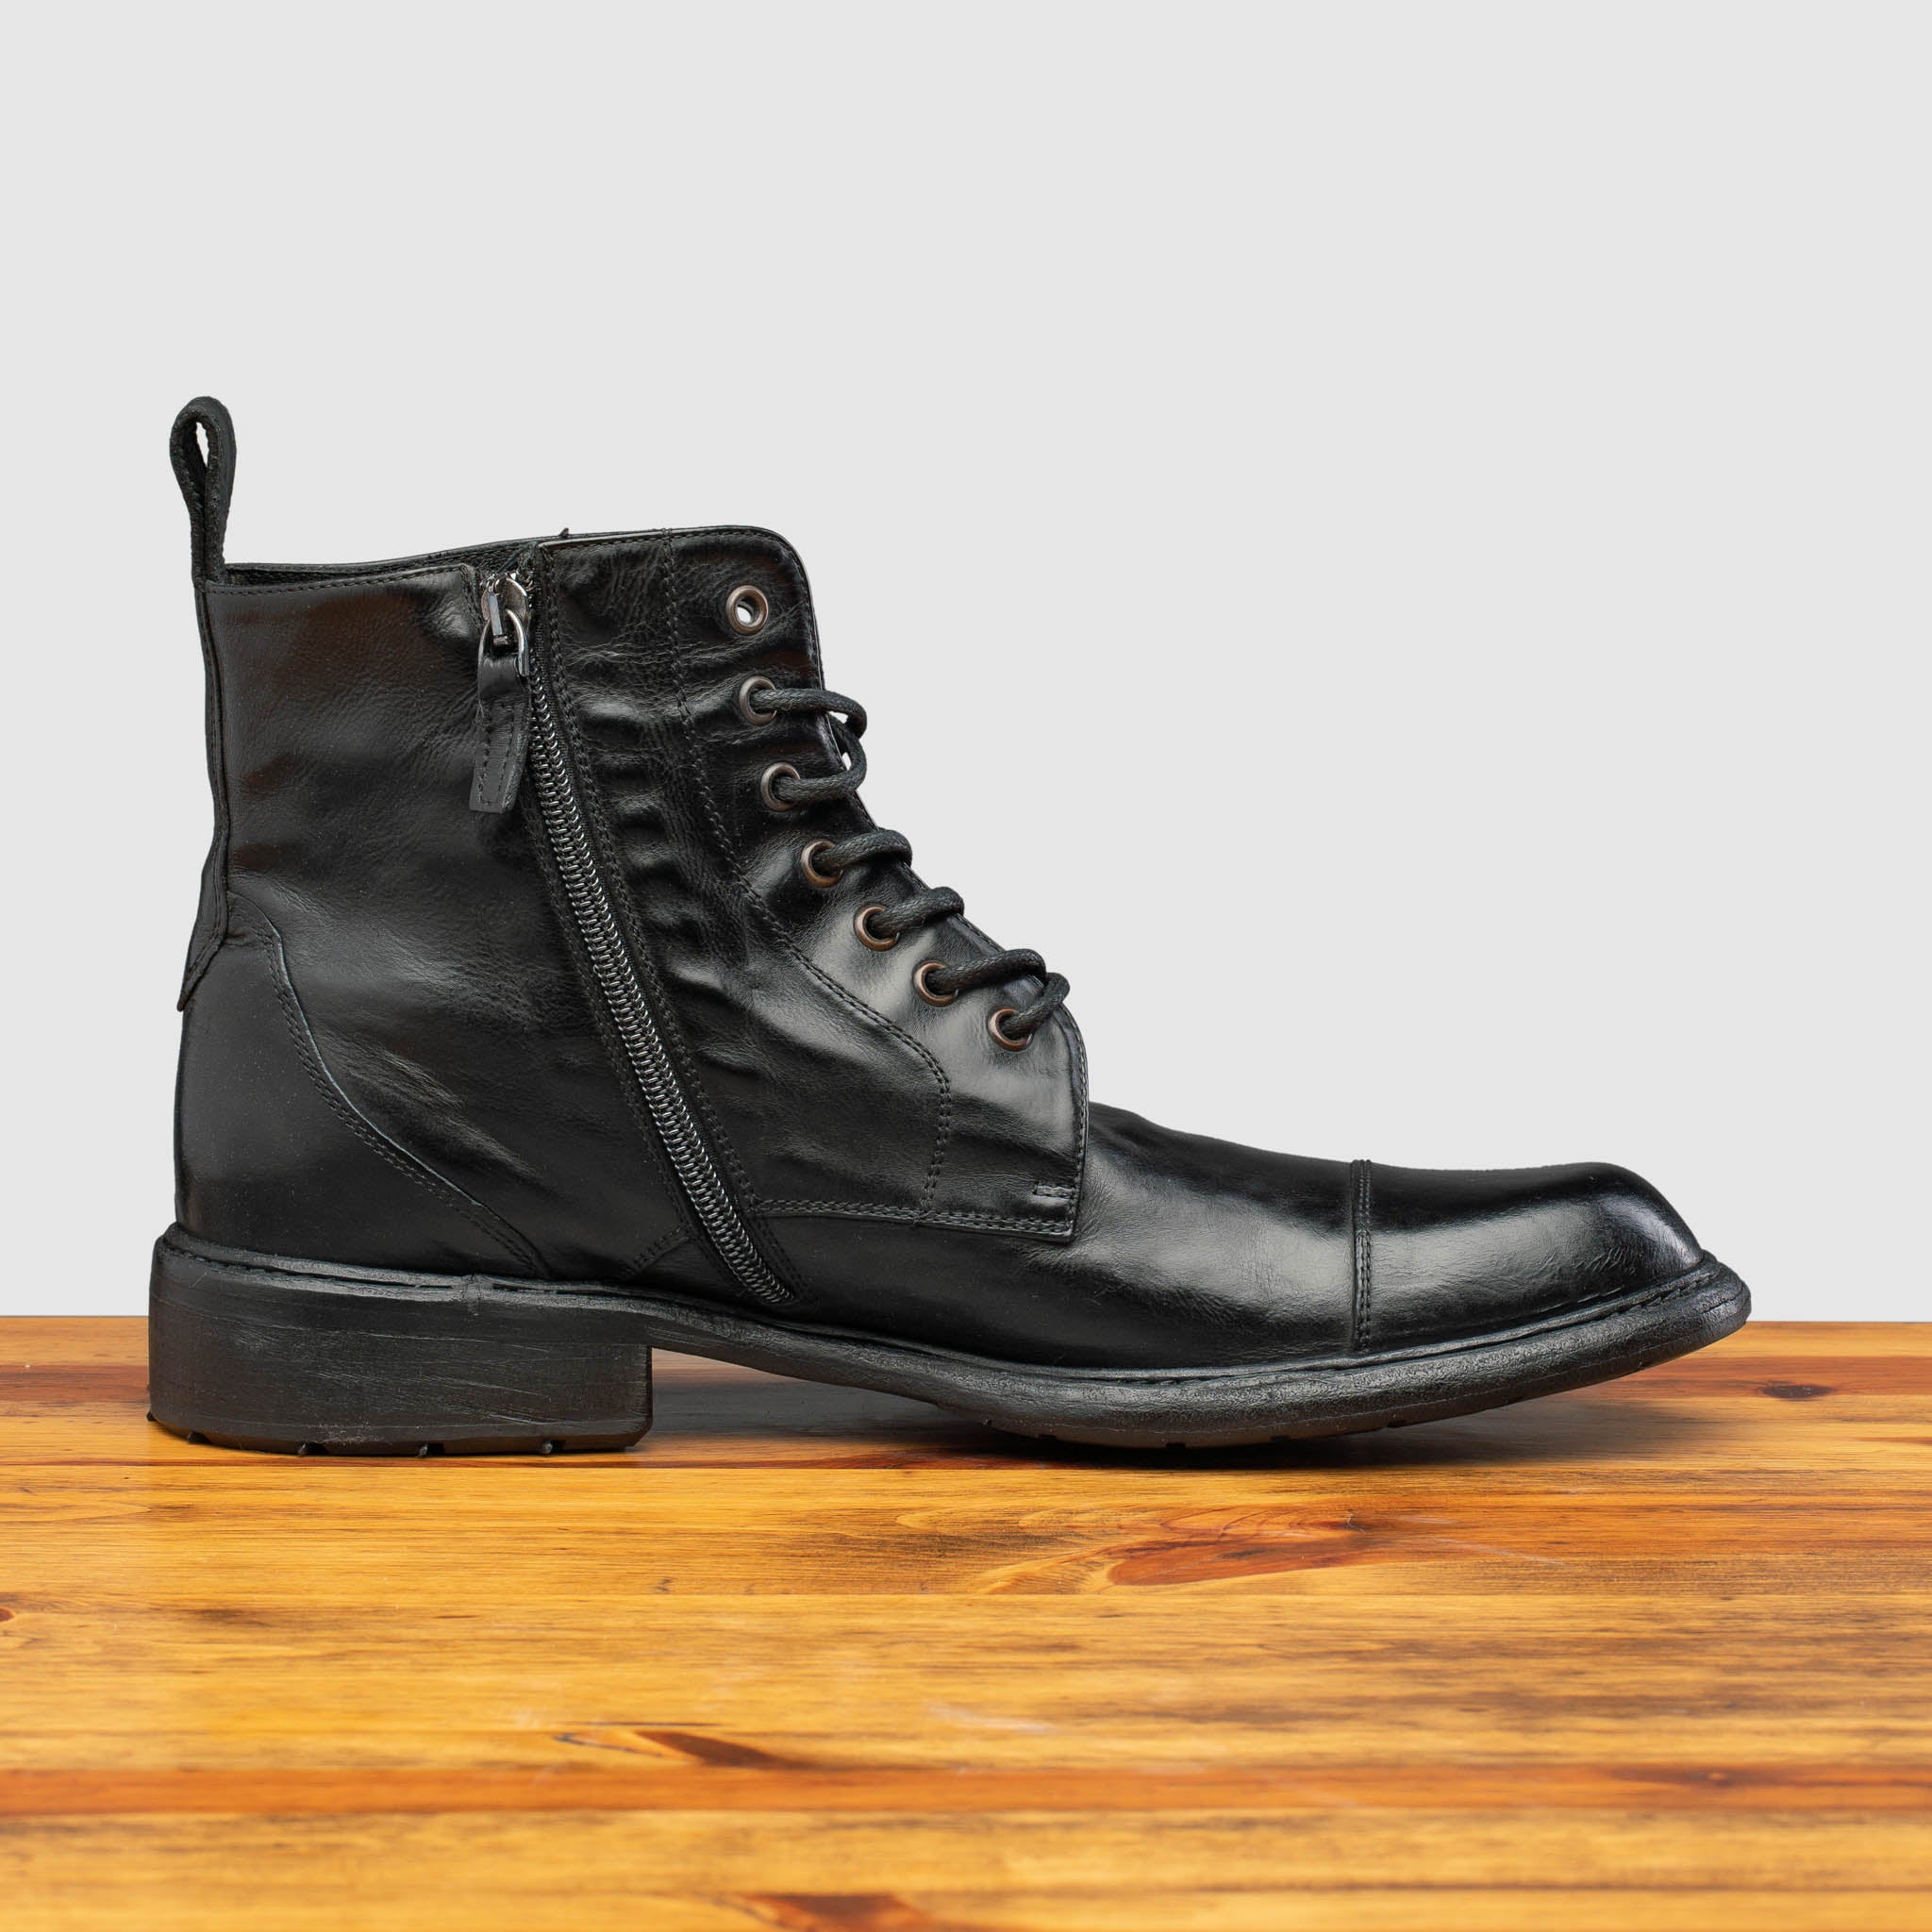 Side profile of Q549 Calzoleria Toscana Black Combat Boot on top of a wooden table